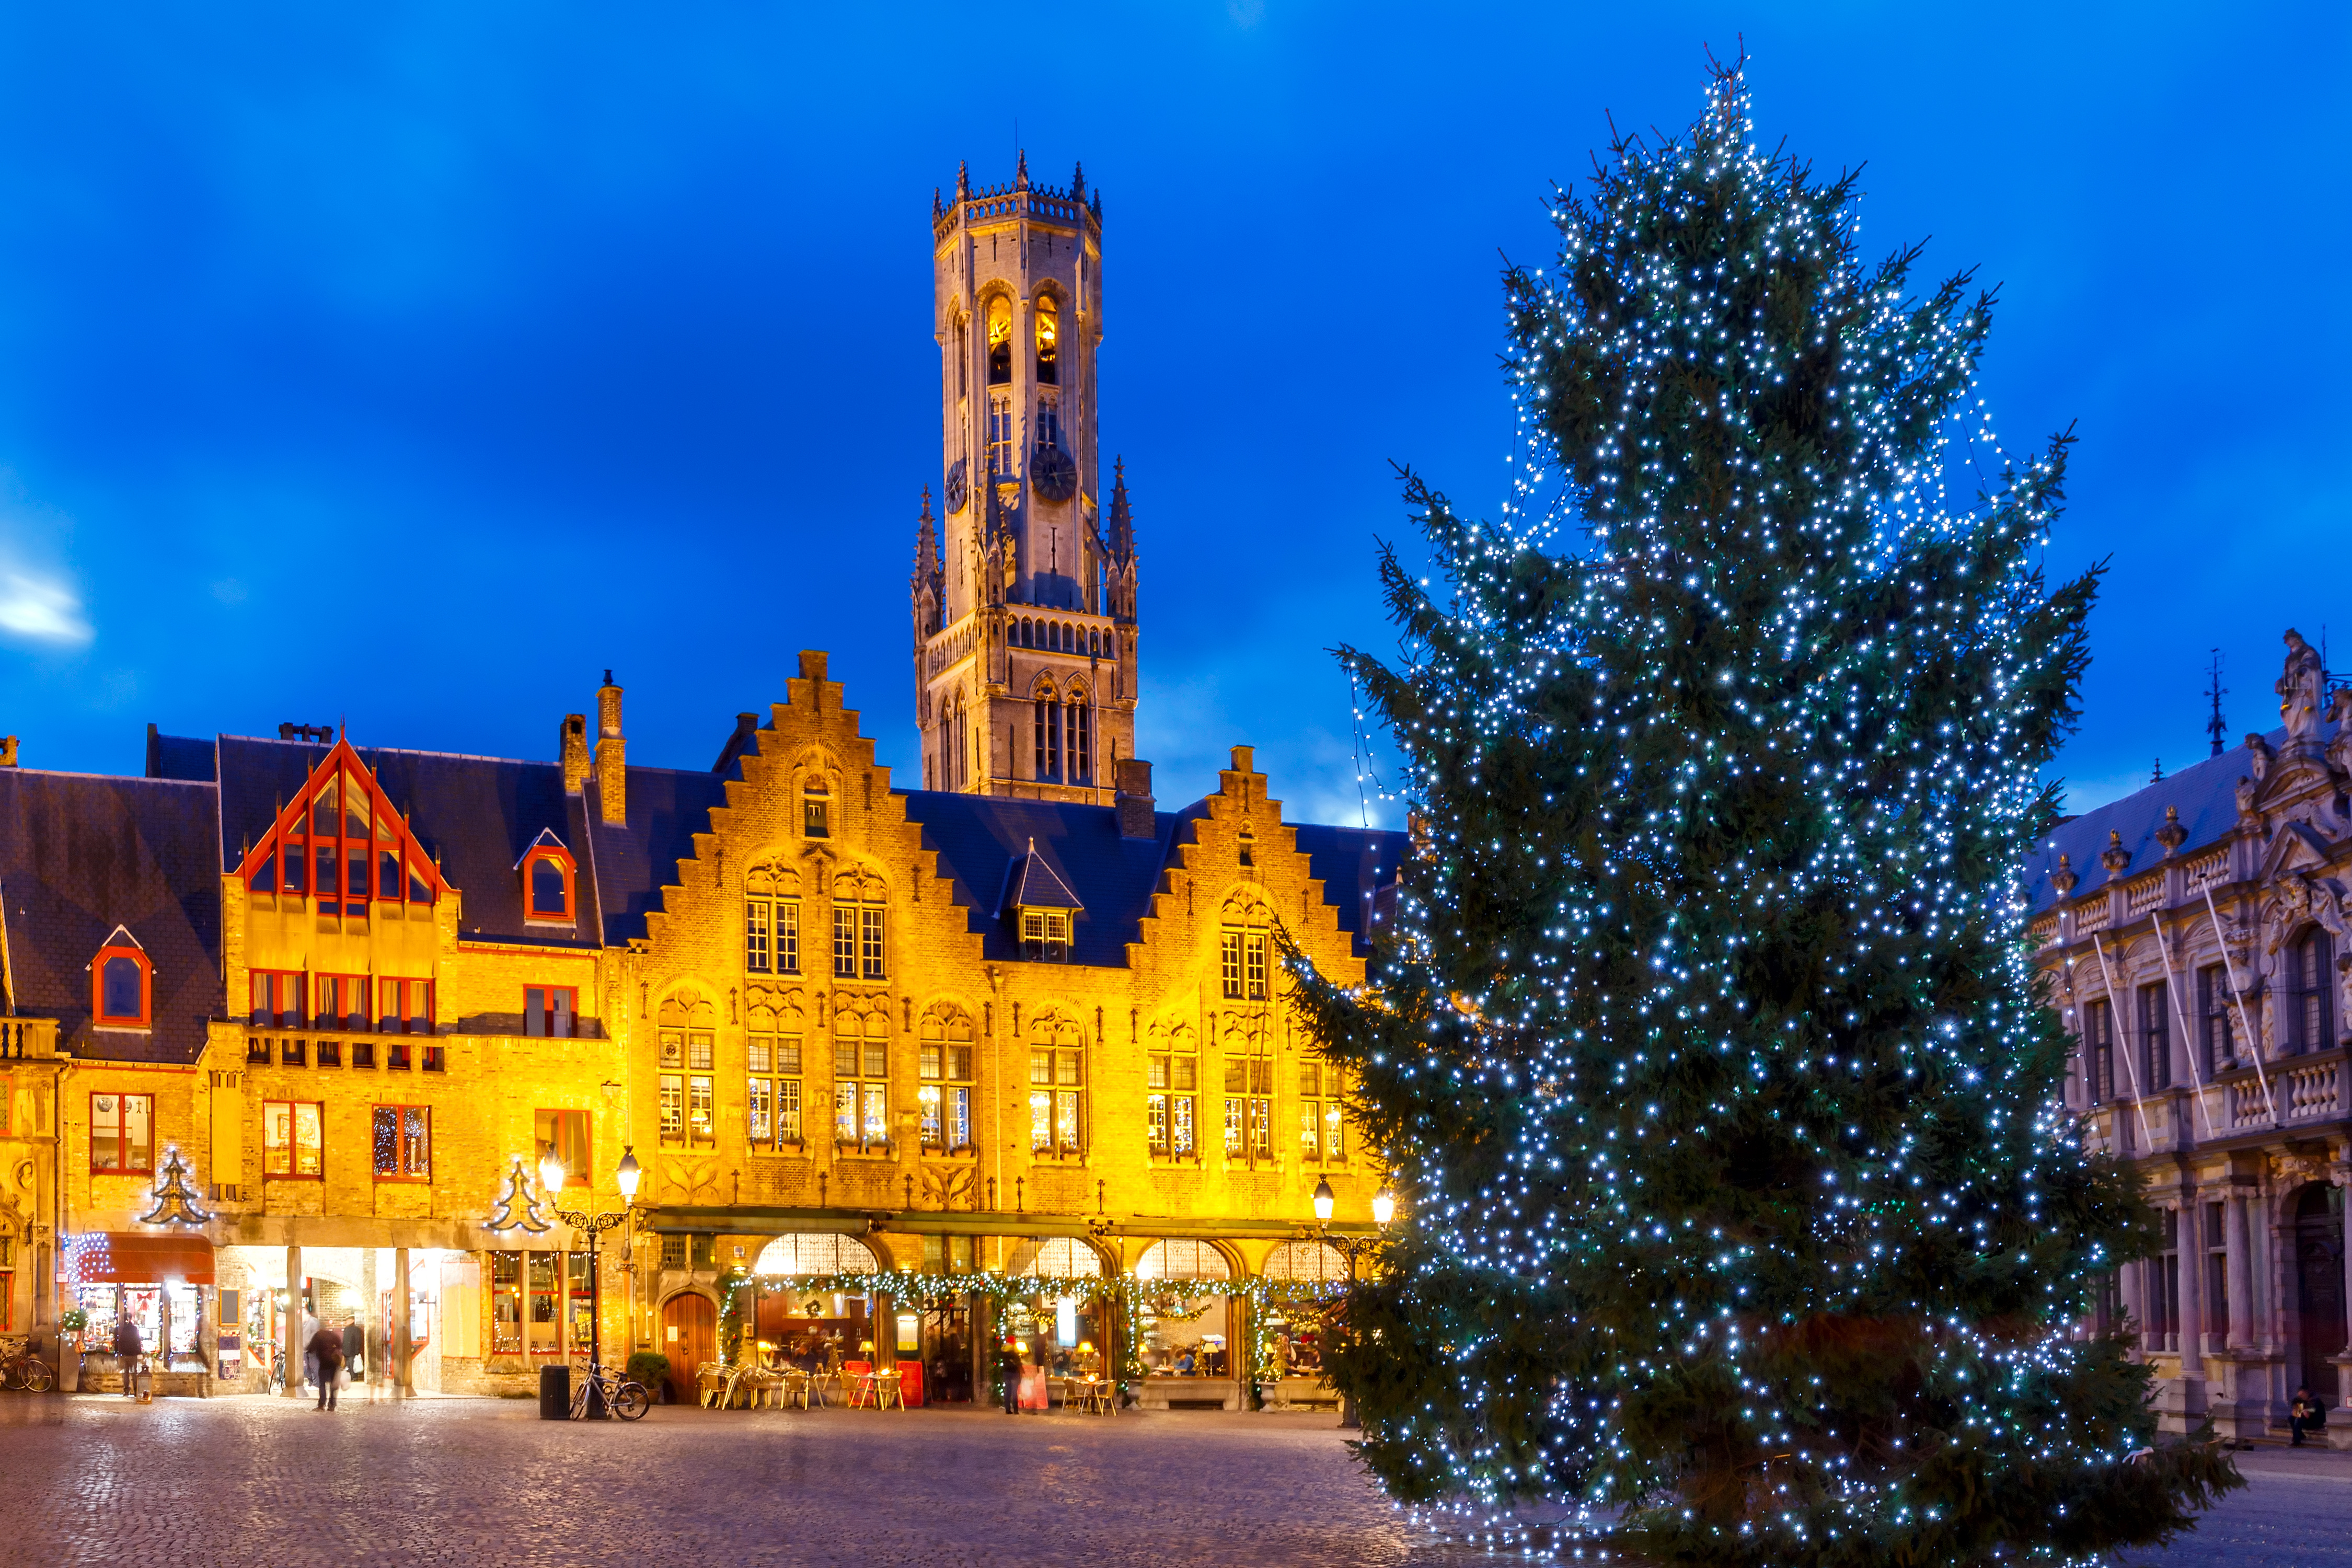 Festive illuminations and Christmas tree on the Burg Square in the Belgian city of Bruges.